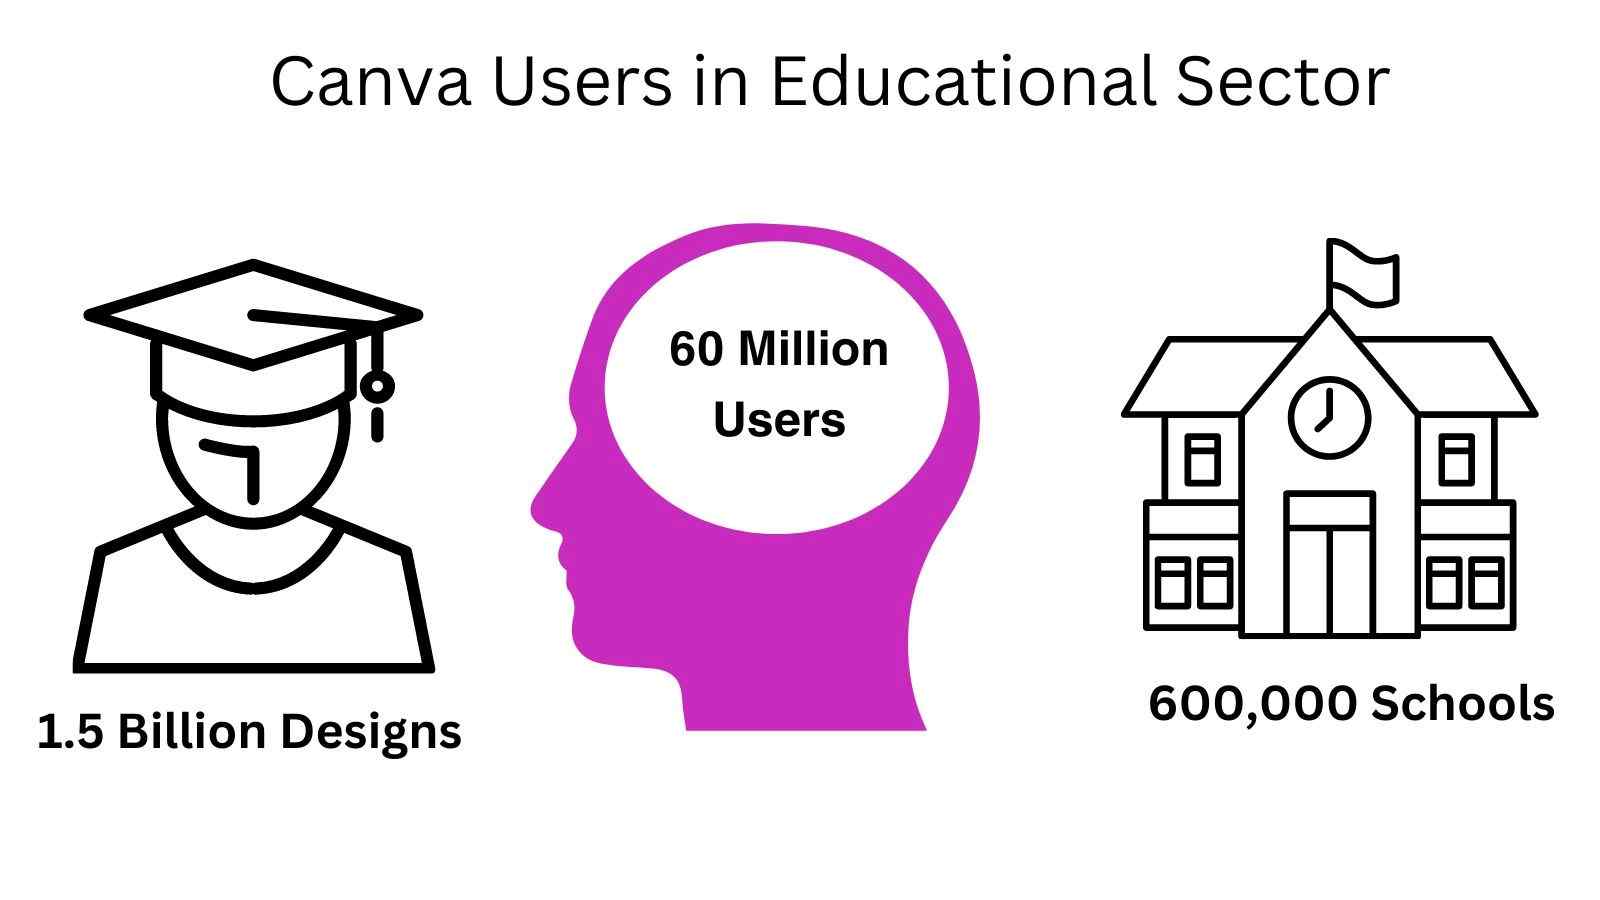 image-showcasing-canva-users-in-education-sector